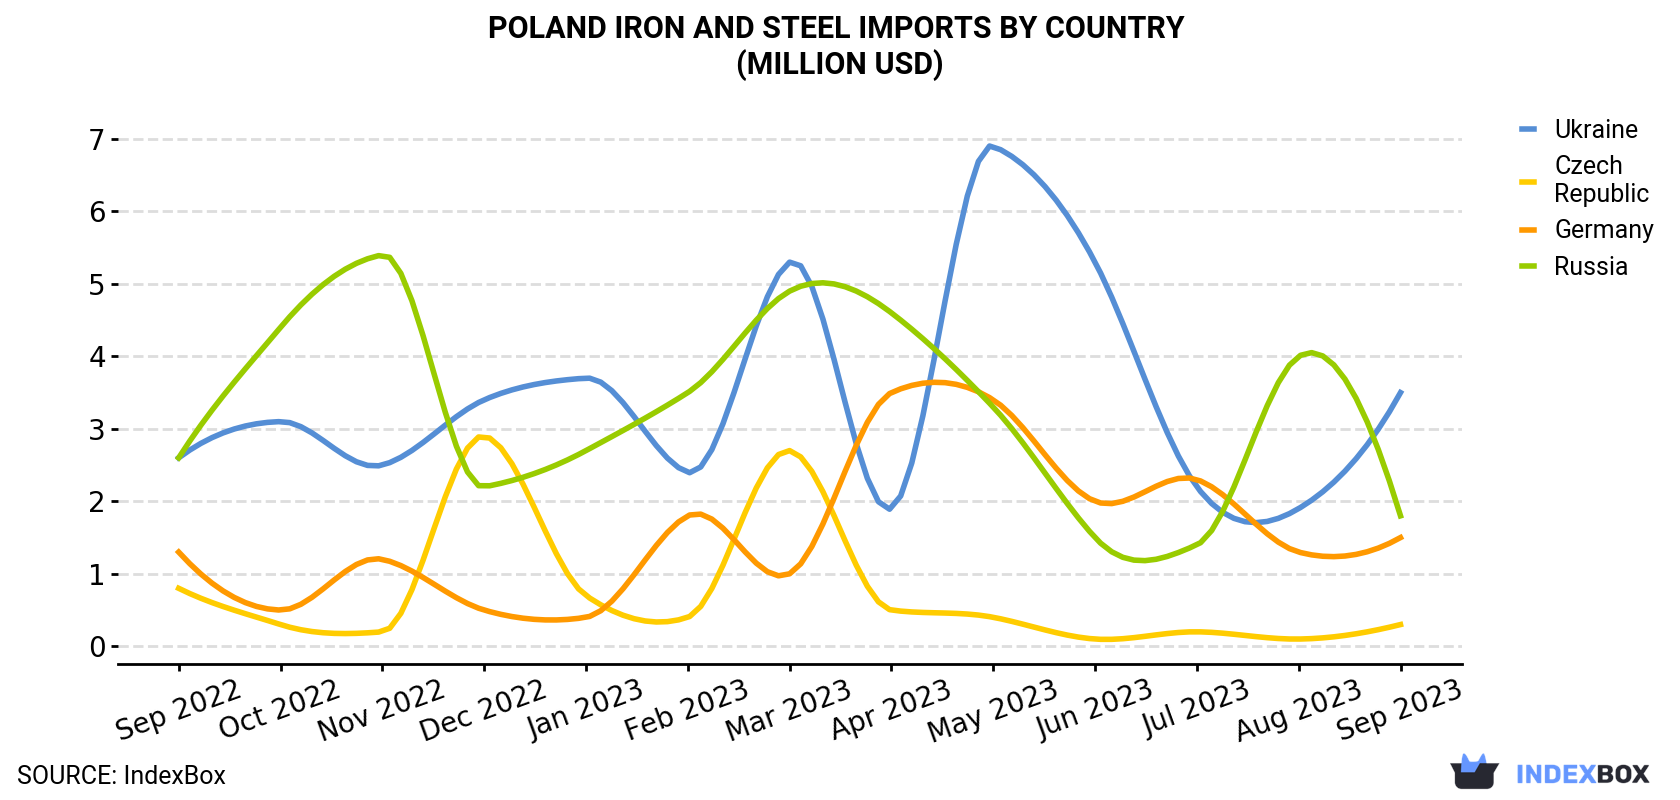 Poland Iron and Steel Imports By Country (Million USD)